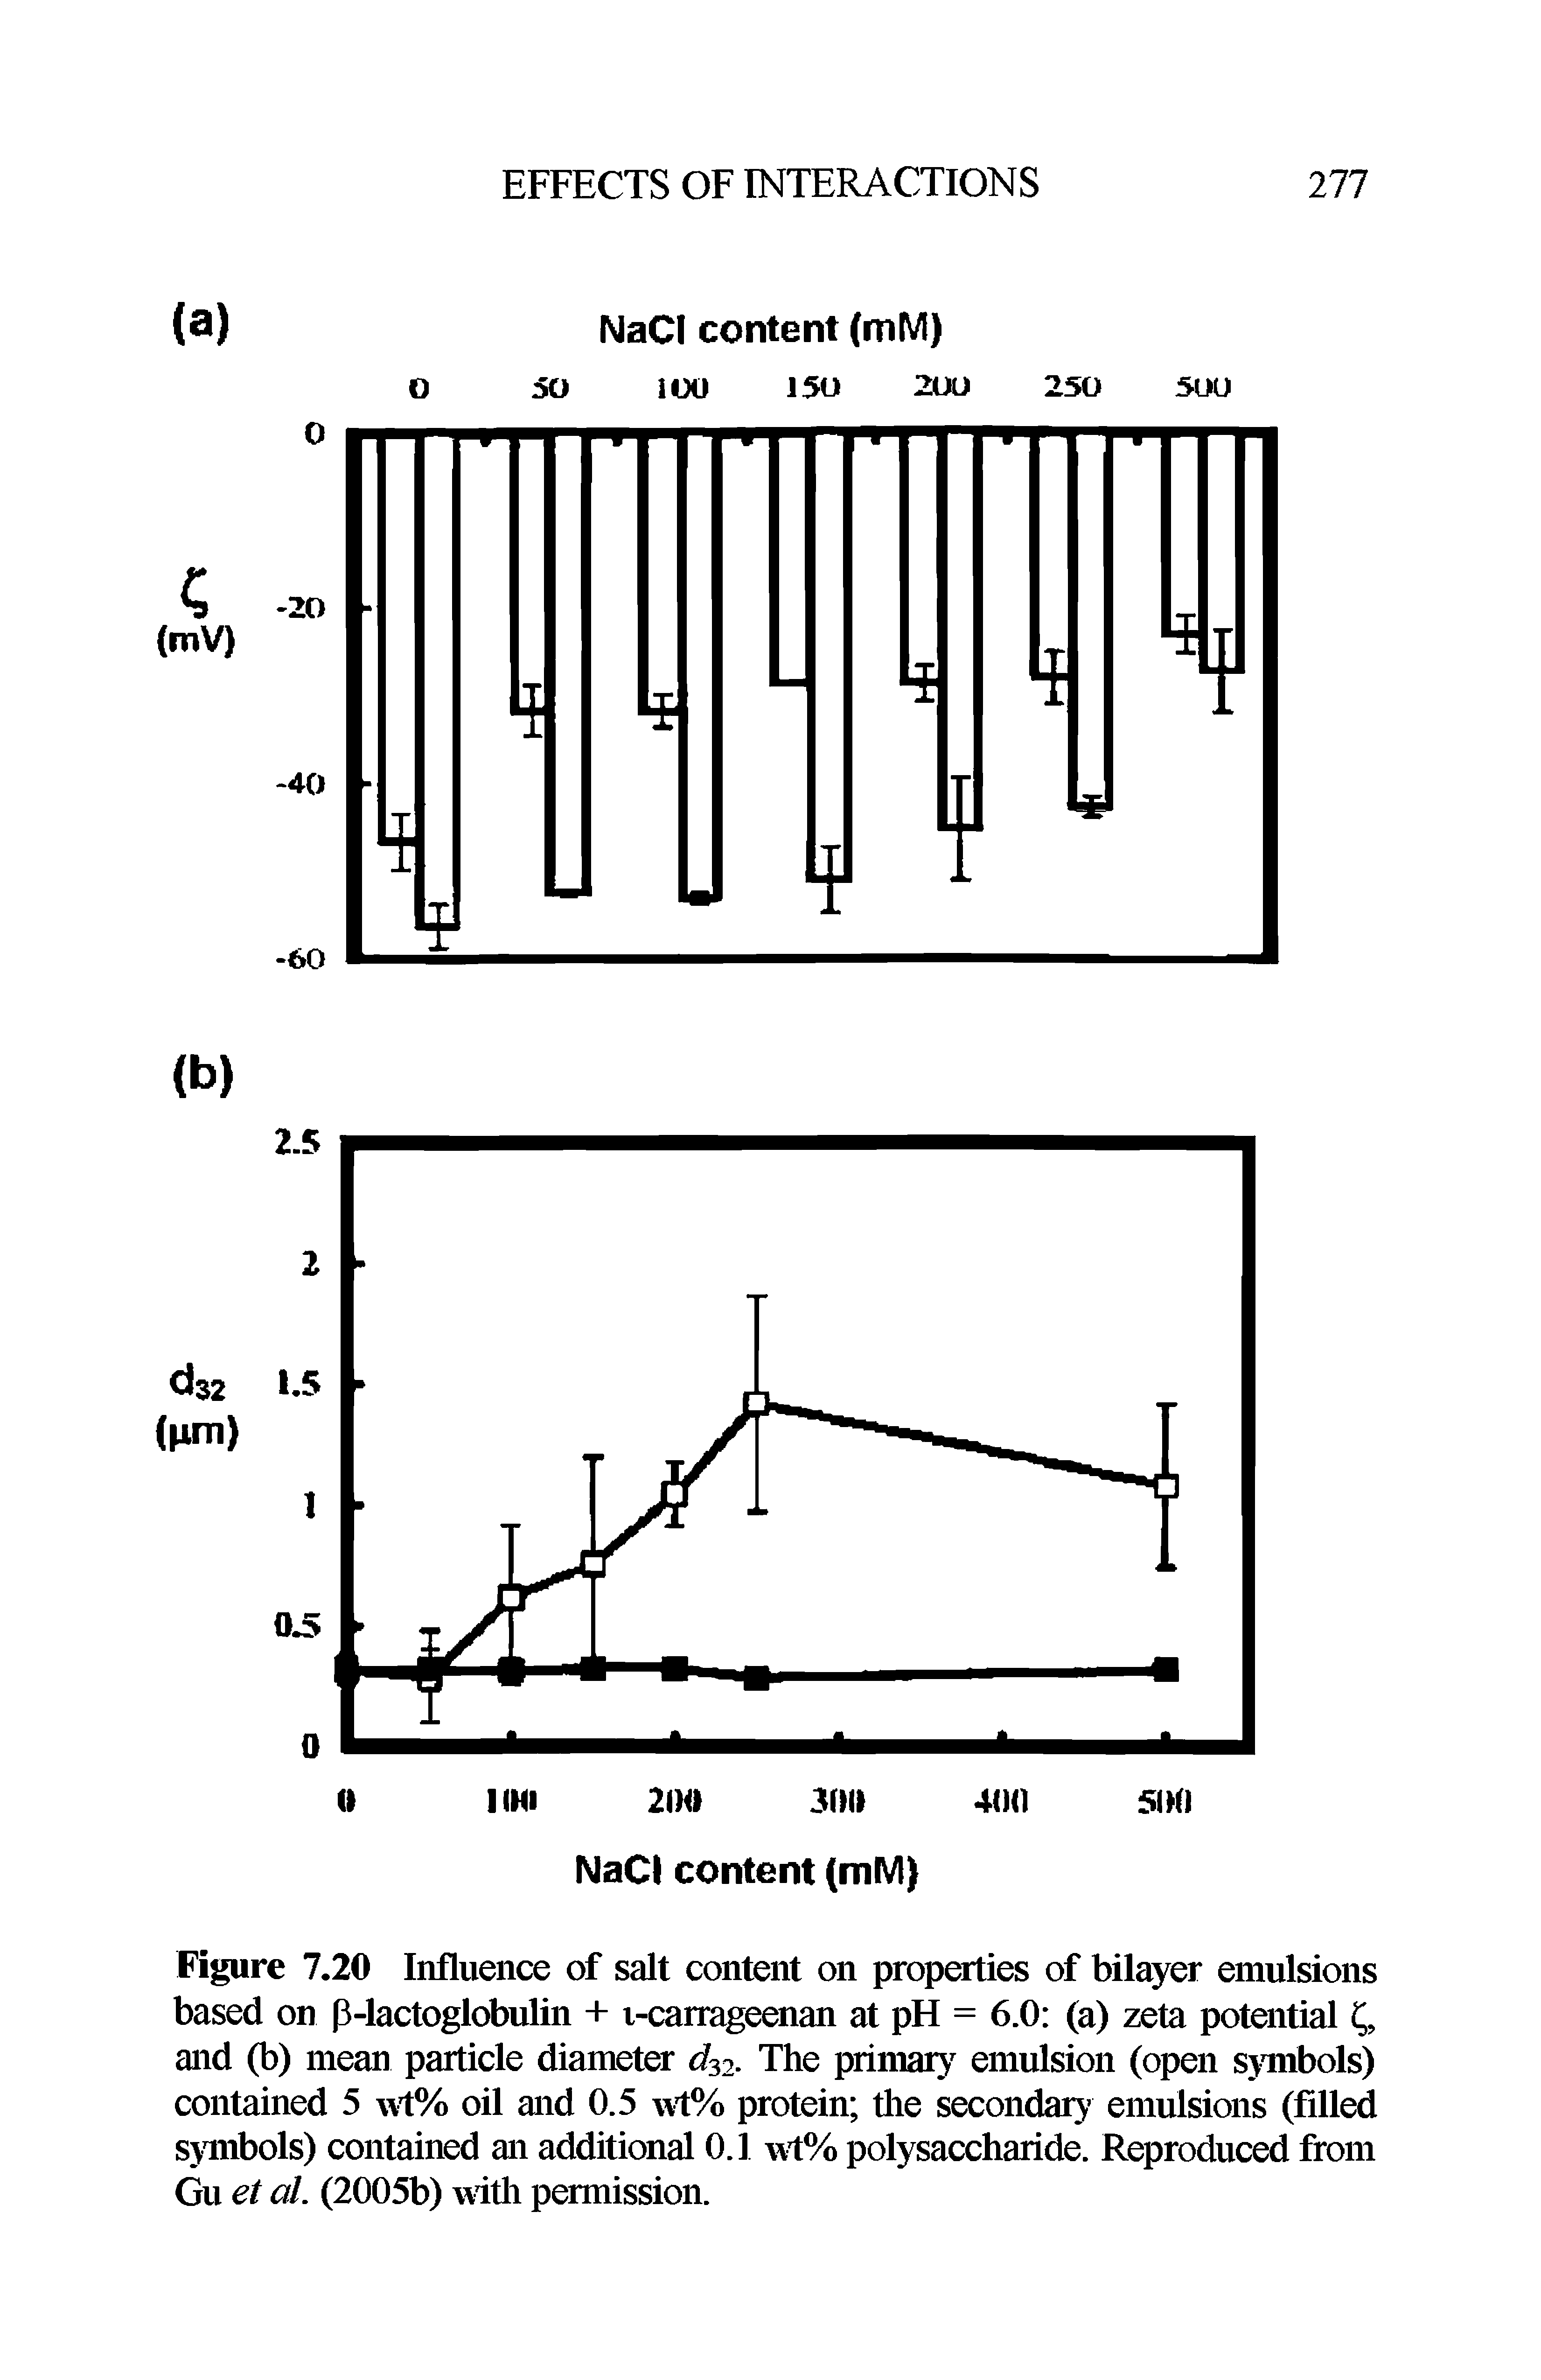 Figure 7.20 Influence of salt content on properties of bilayer emulsions based on p-lactoglobulin + i-carrageenan at pH = 6.0 (a) zeta potential and (b) mean particle diameter The primary emulsion (open symbols) contained 5 wt% oil and 0.5 wt% protein die secondary emulsions (ftlled symbols) contained an additional 0.1 wt% polysaccharide. Reproduced from Gu el al. (2005b) with permission.